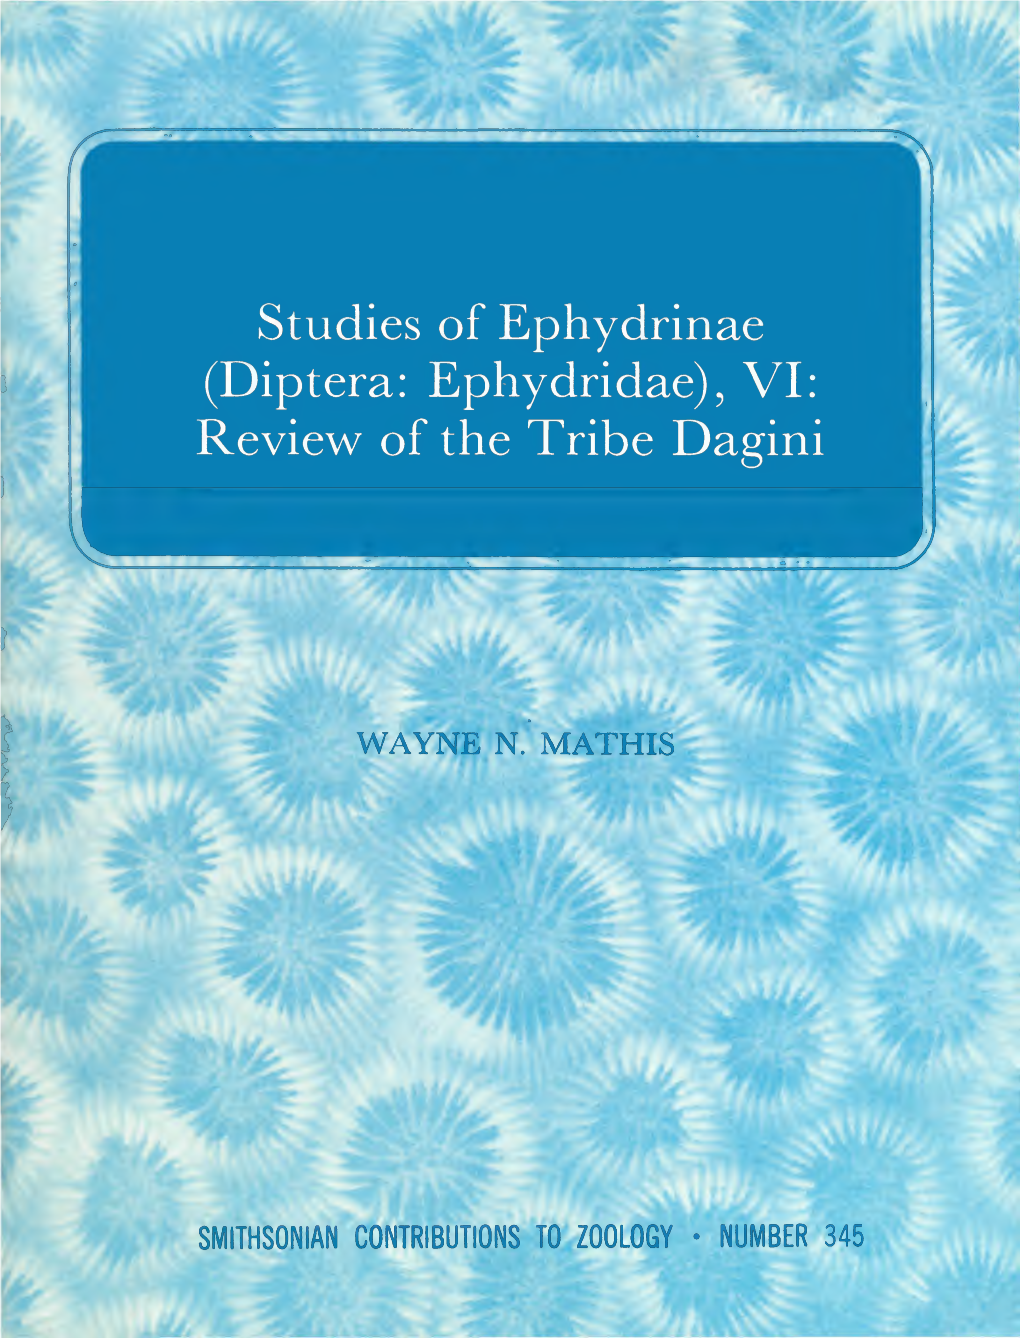 Diptera: Ephydridae), VI: Review of the Tribe Dagini